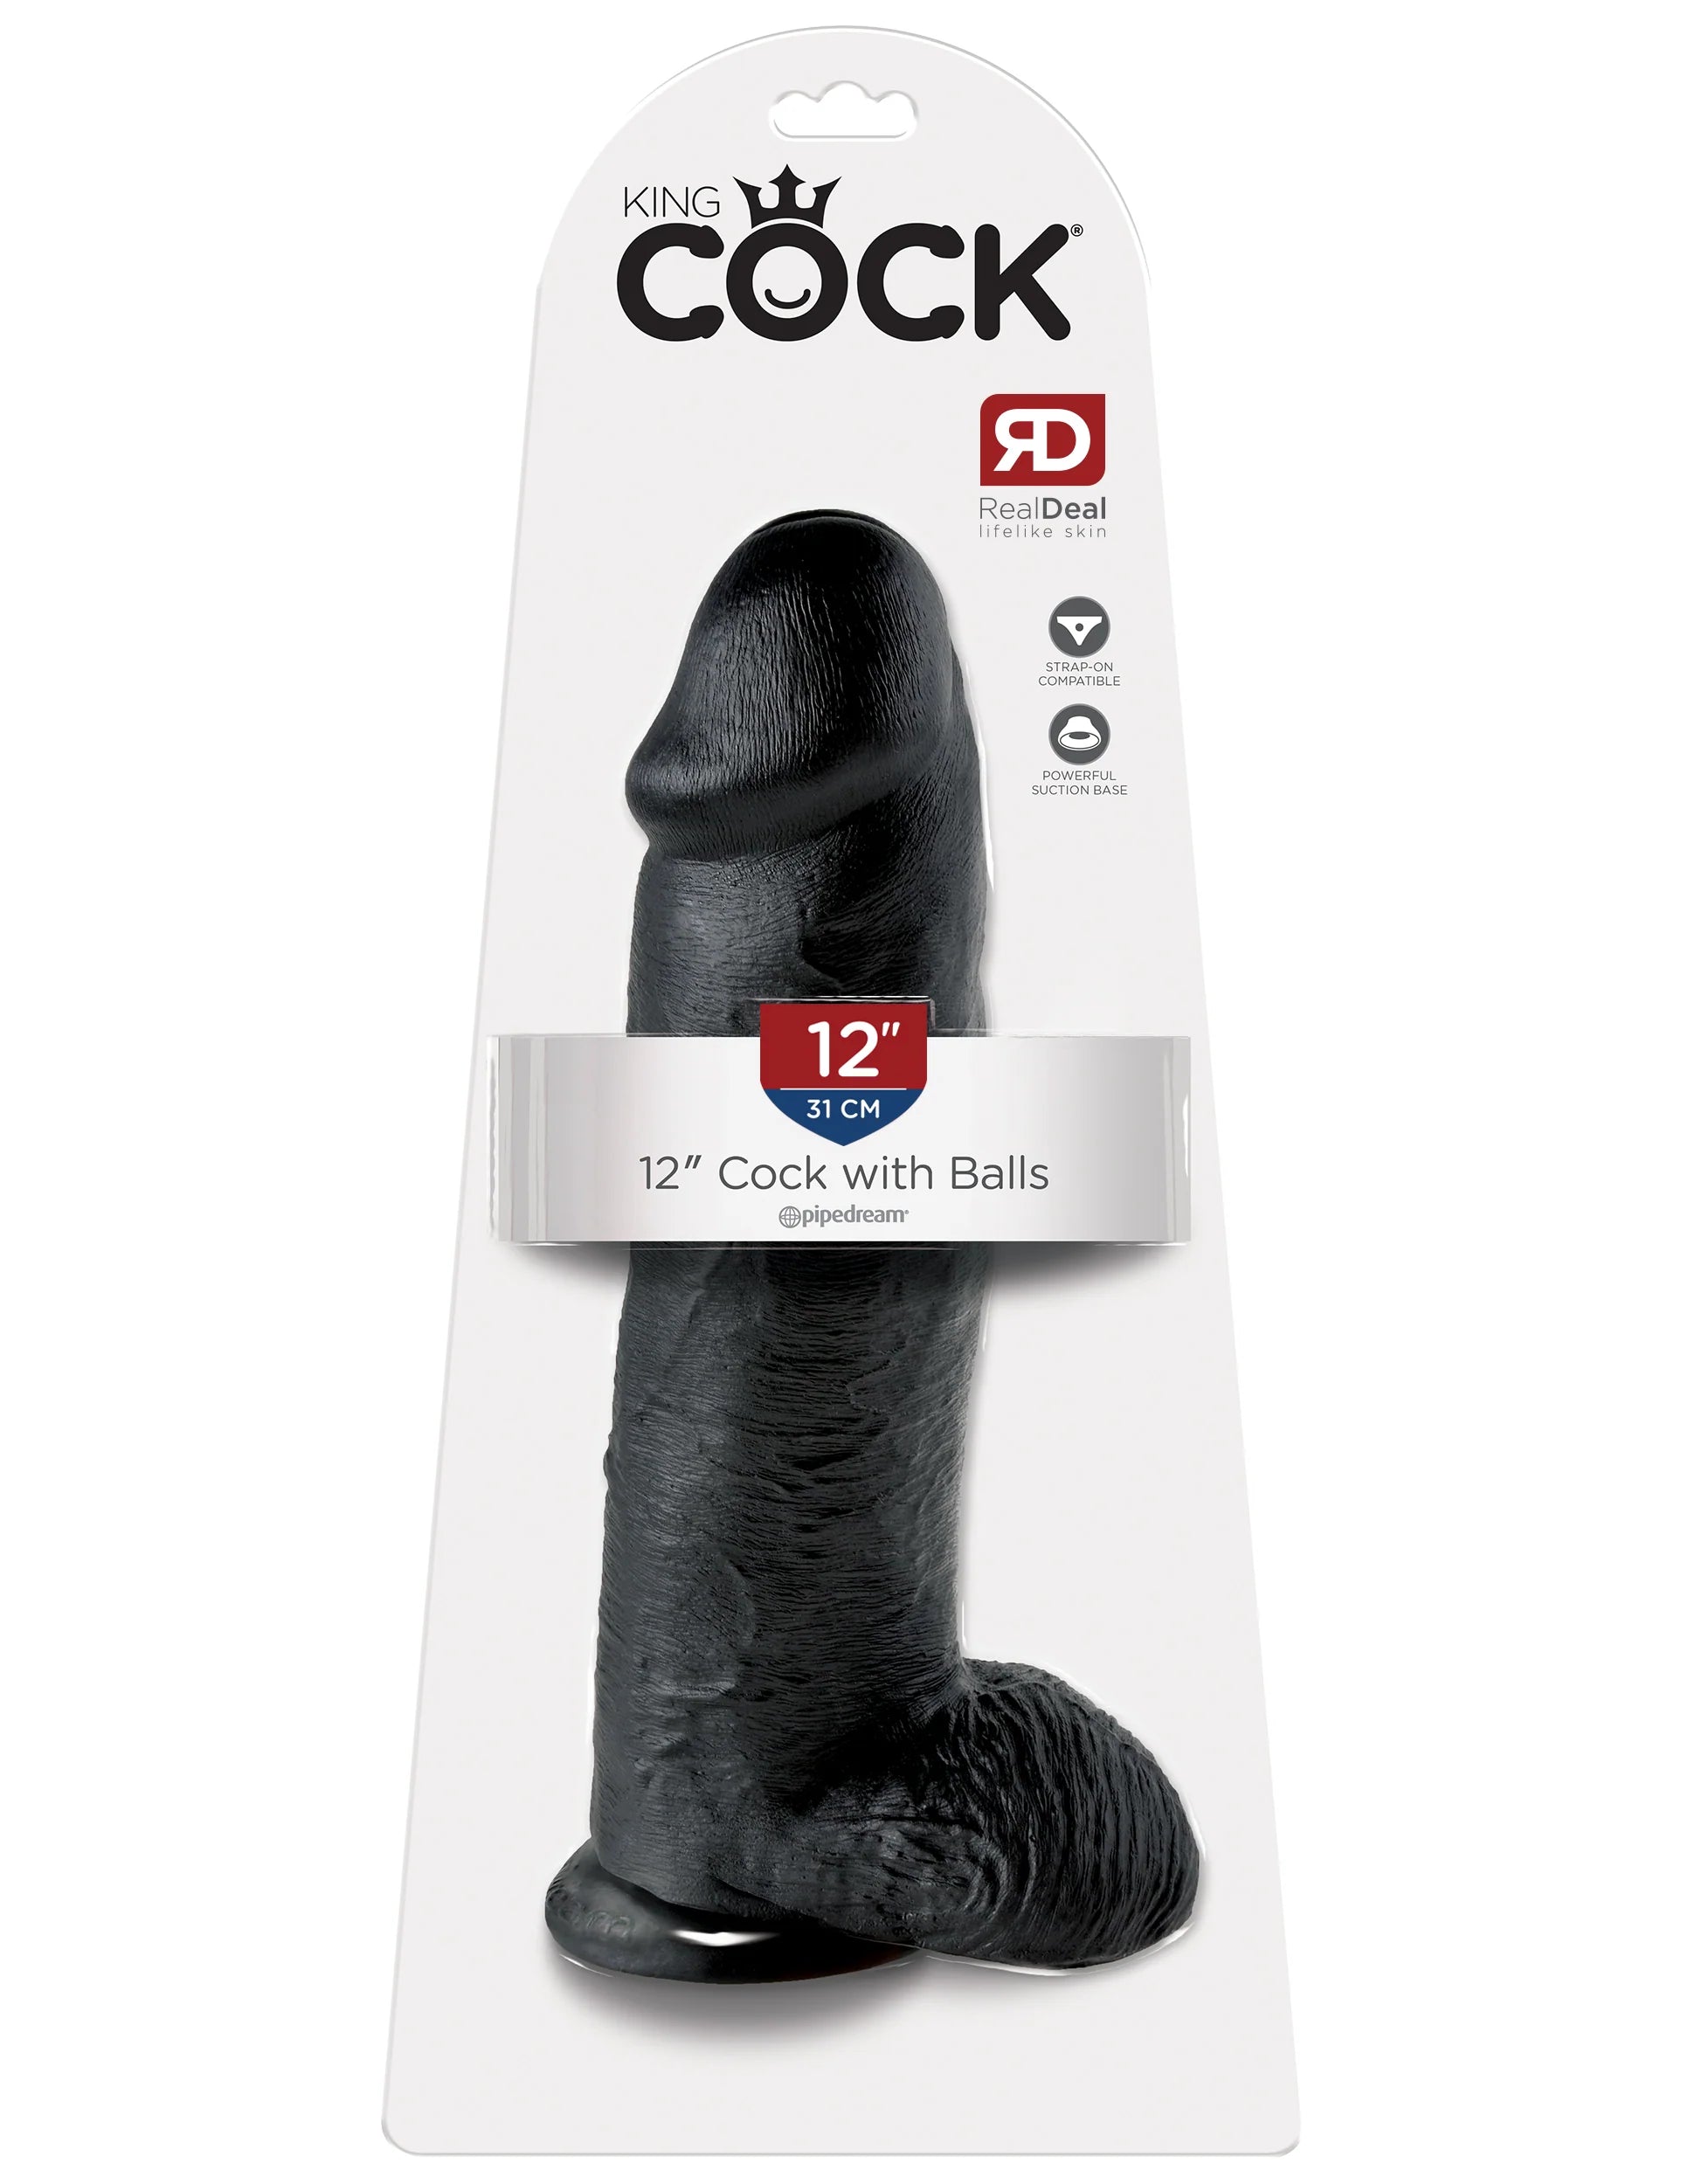 Pipedream King Cock 12 in. Cock With Balls Realistic Suction Cup Dildo